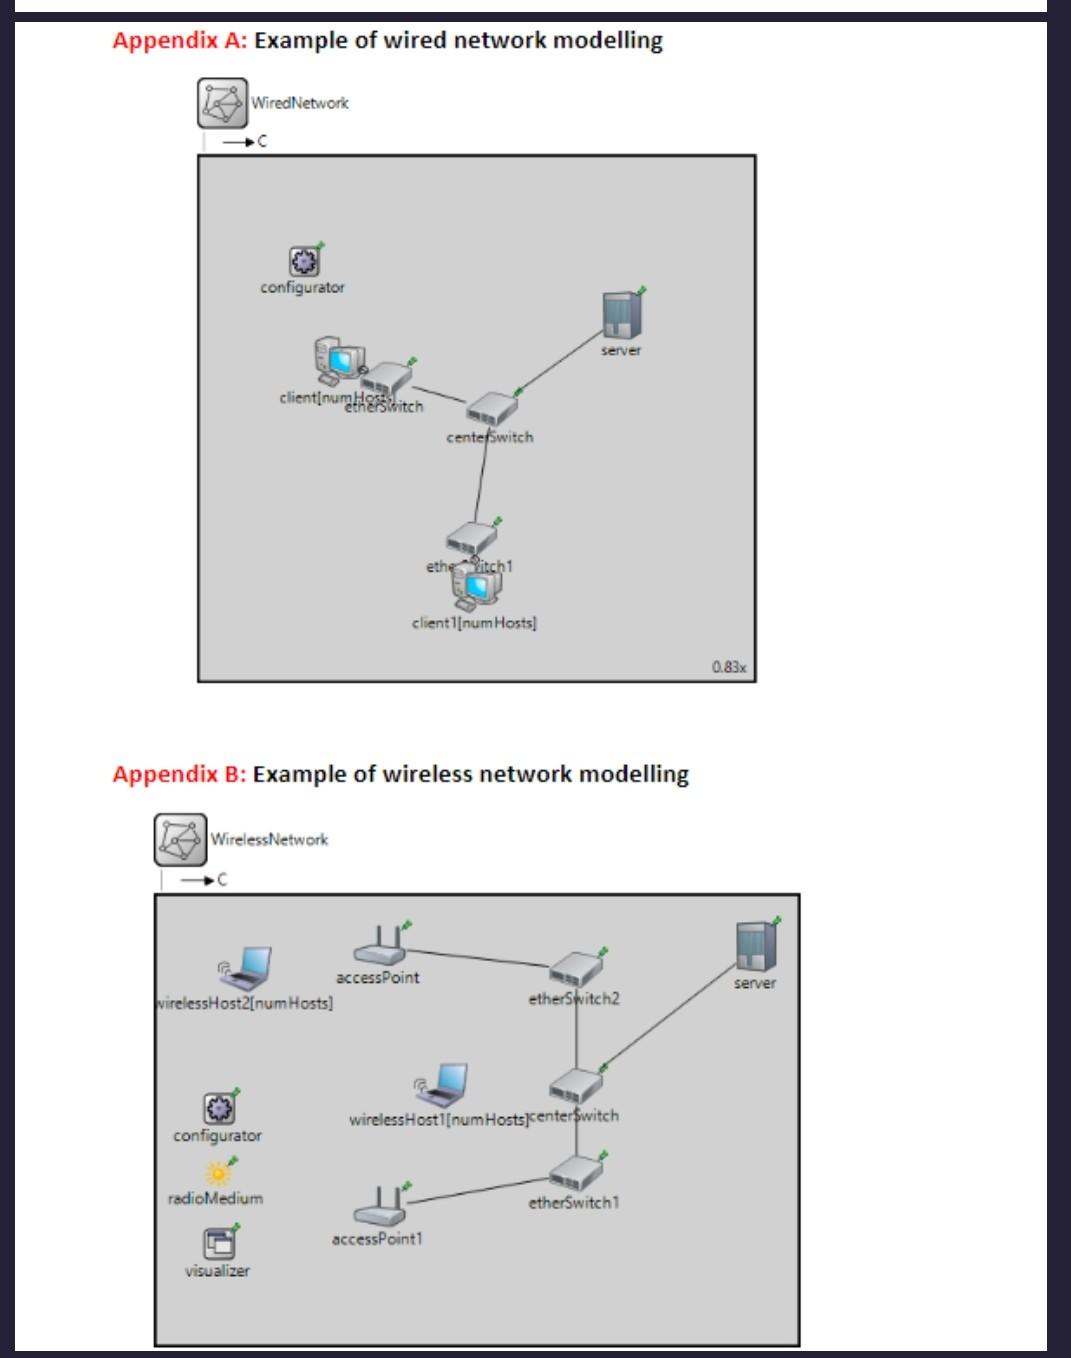 Appendix A: Example of wired network modelling Wired Network .C C configurator WirelessNetwork clienti